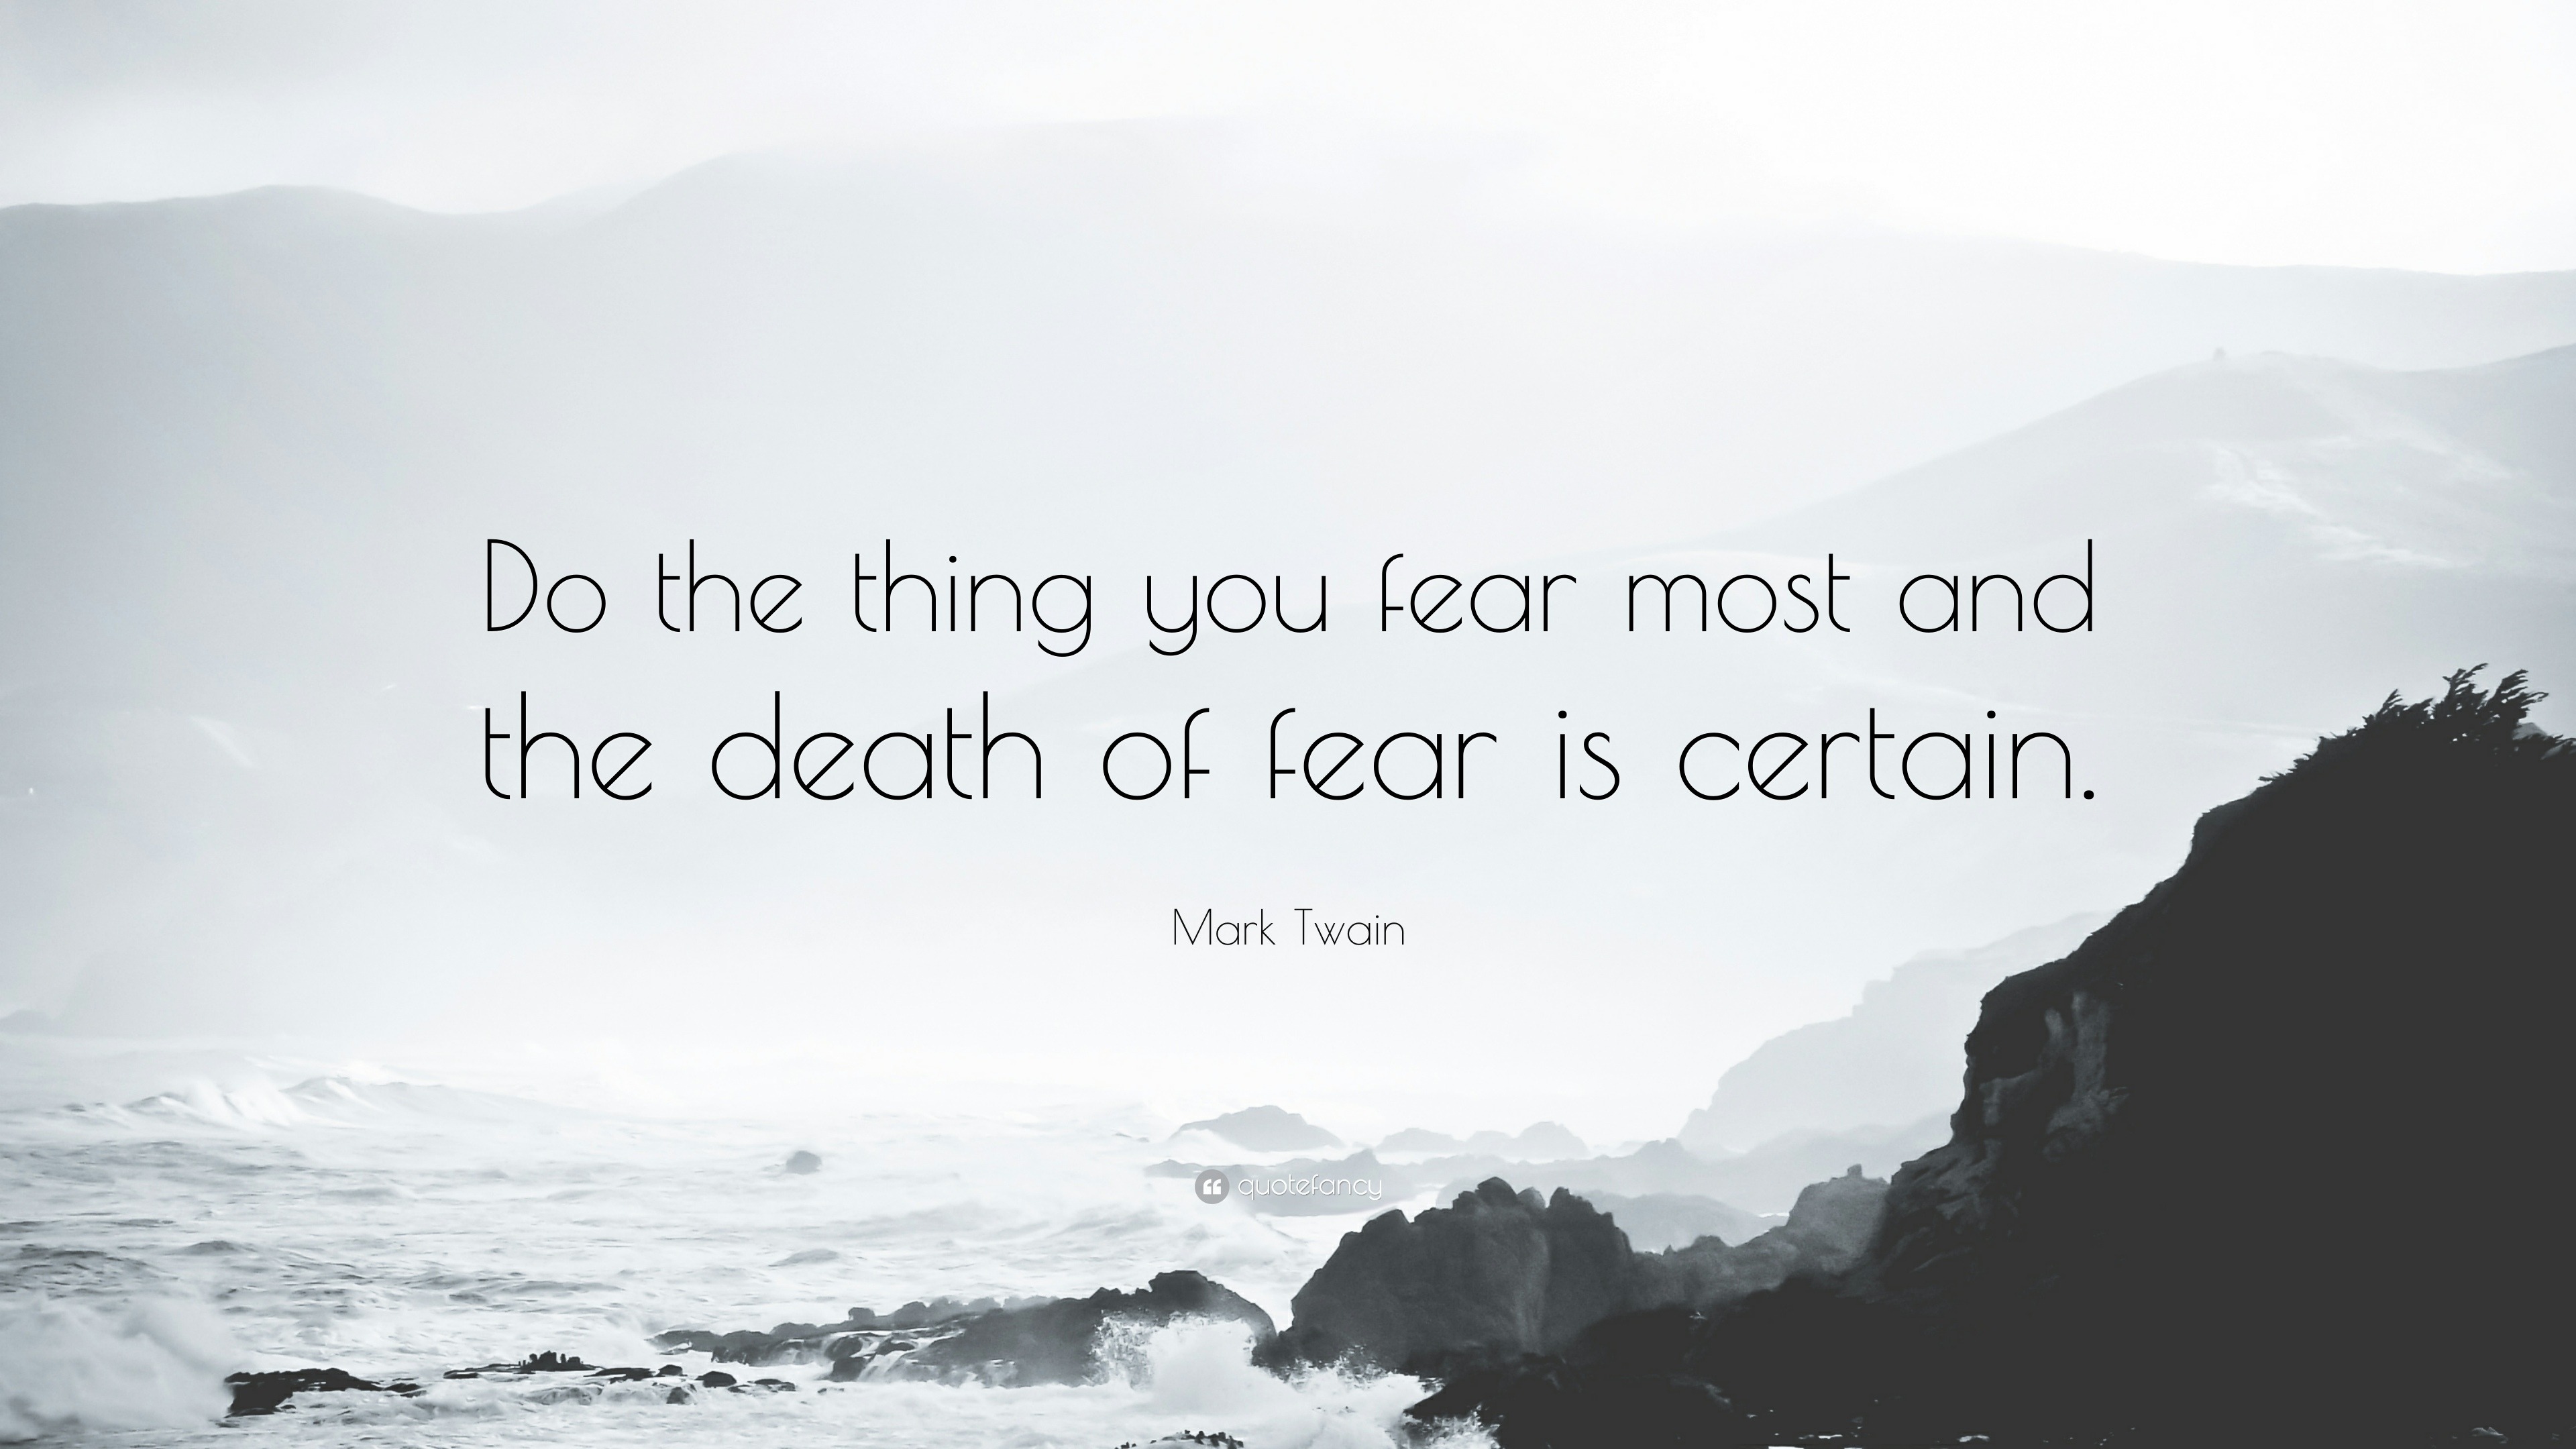 Mark Twain Quote Do The Thing You Fear Most And The Death Of Fear Is Certain